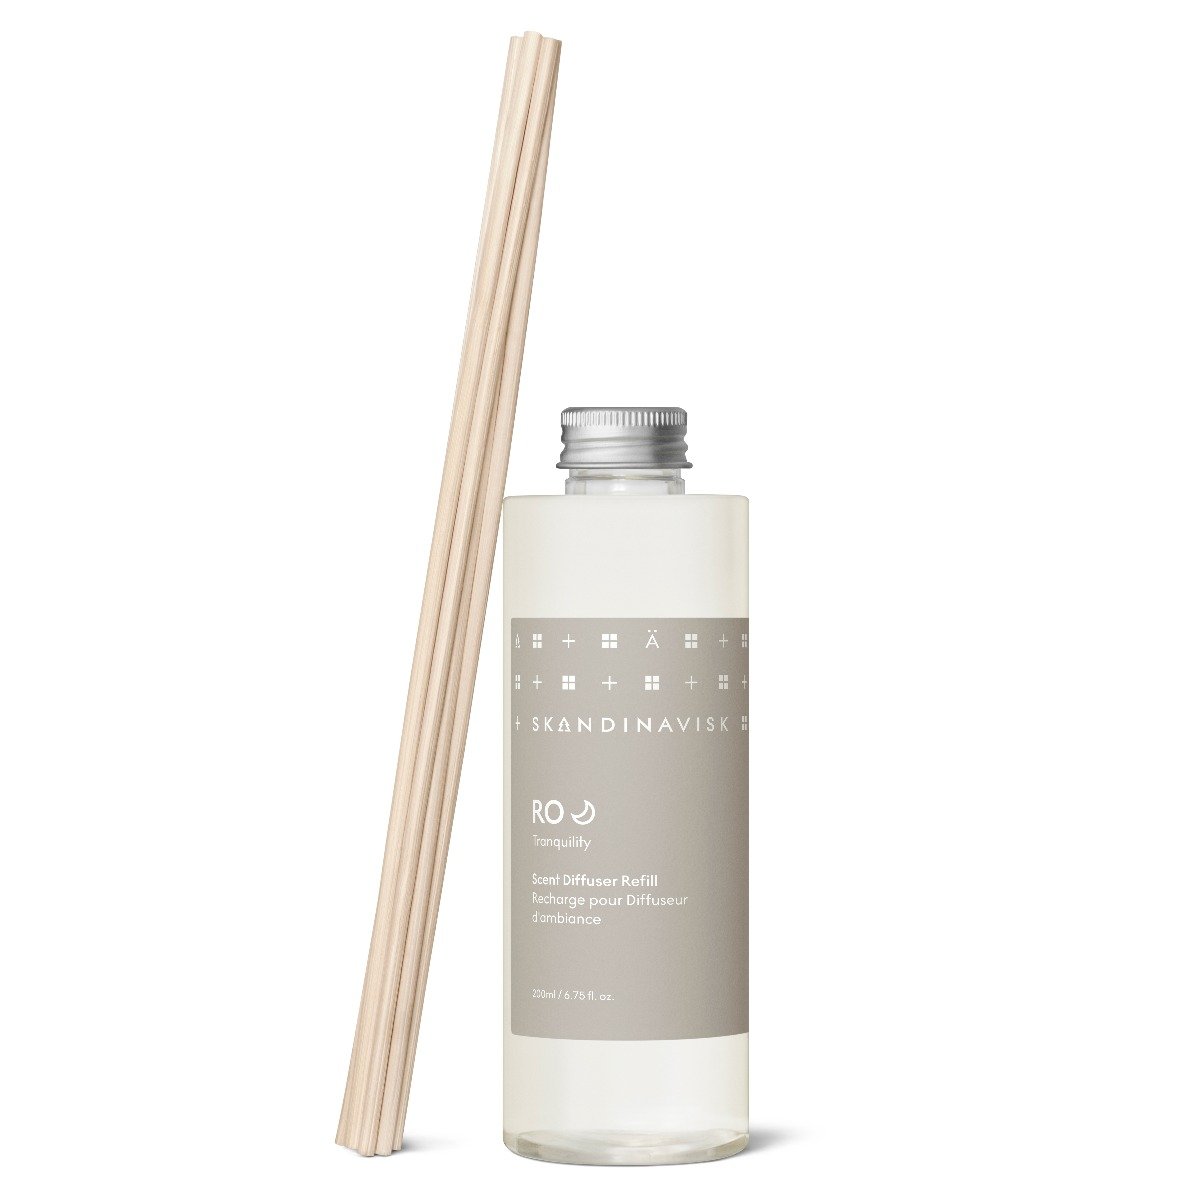 RO (Tranquility) Diffuser Refill